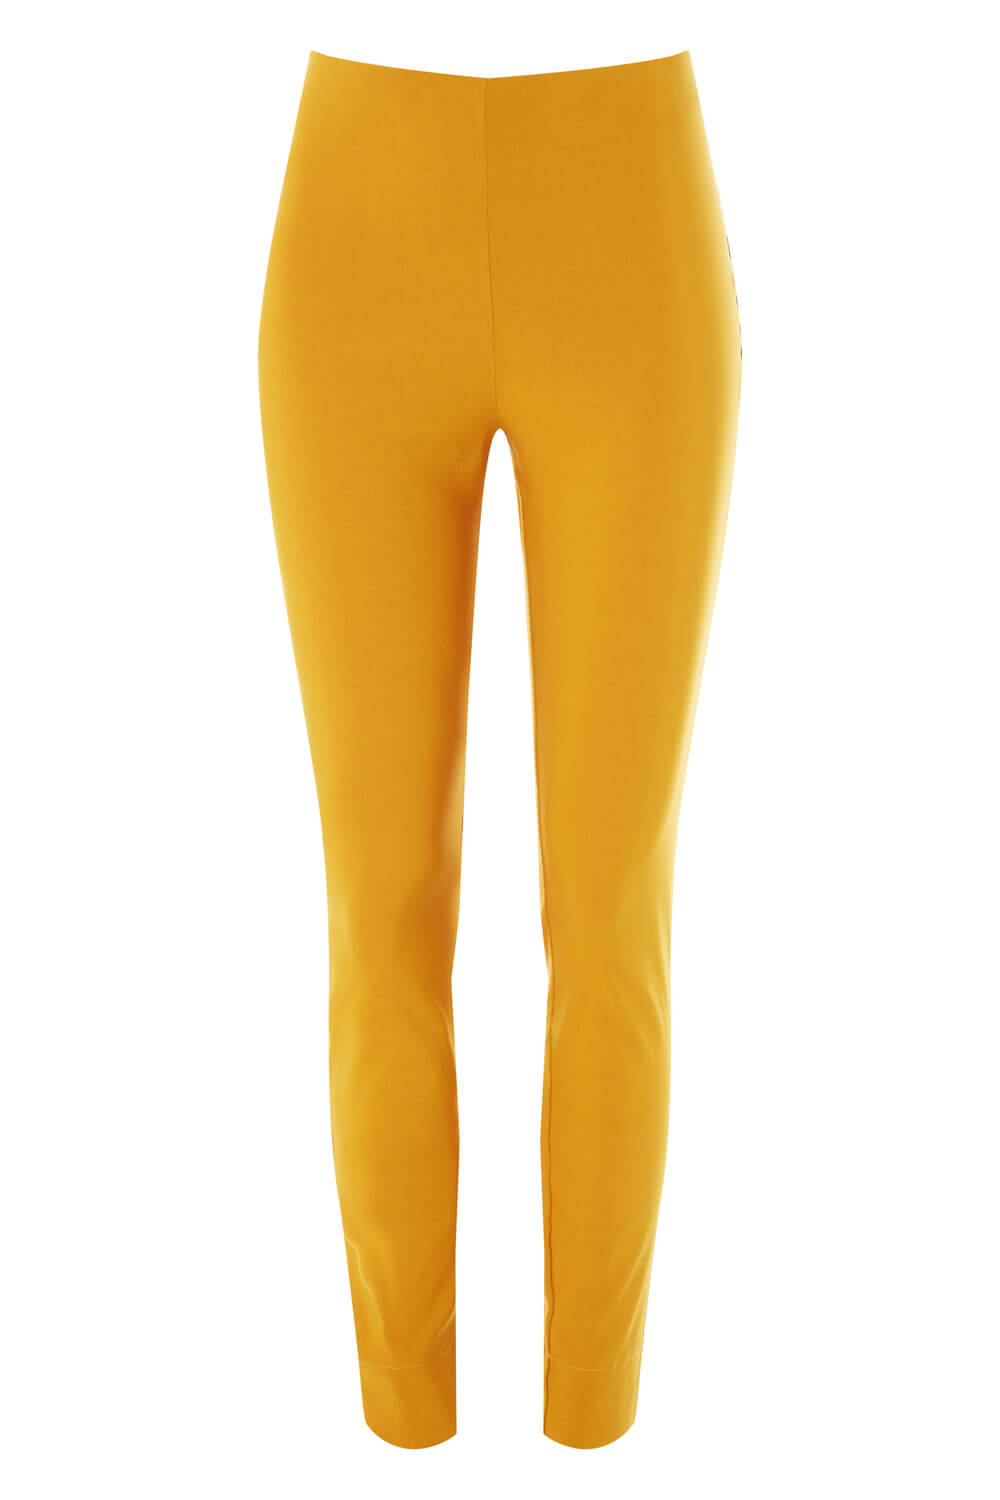 Amber Full Length Stretch Trousers, Image 4 of 4